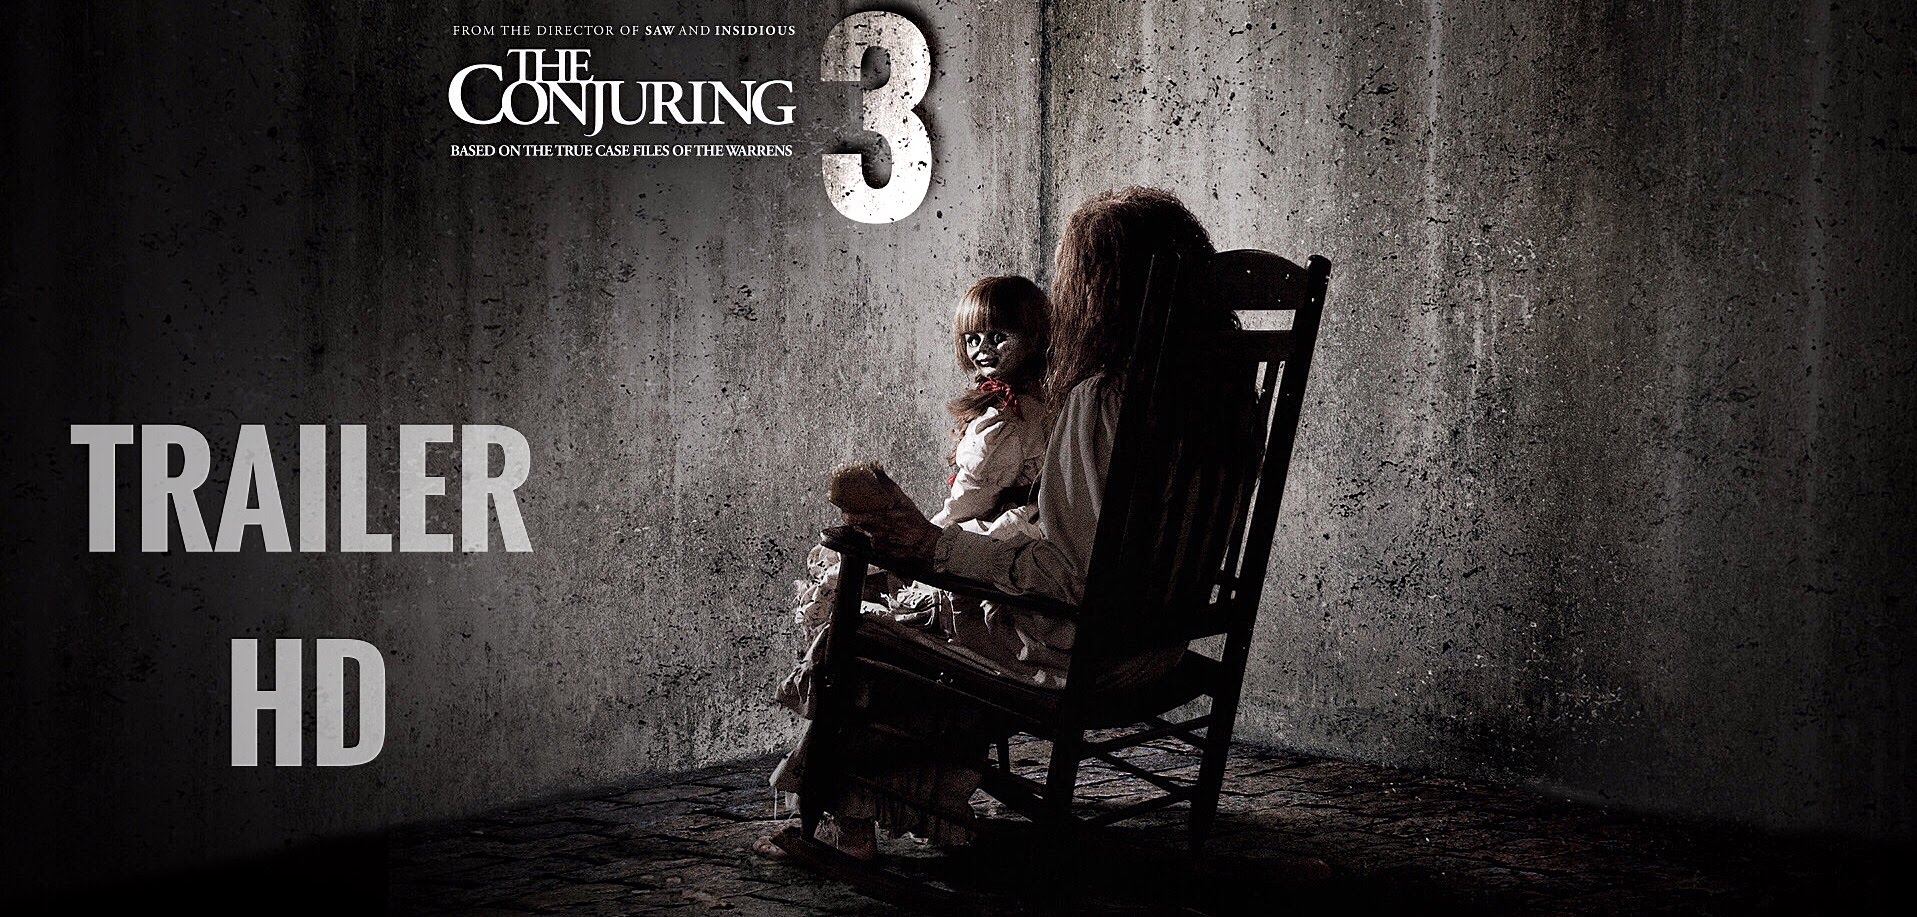 the conjuring movie full hd 1080p free download